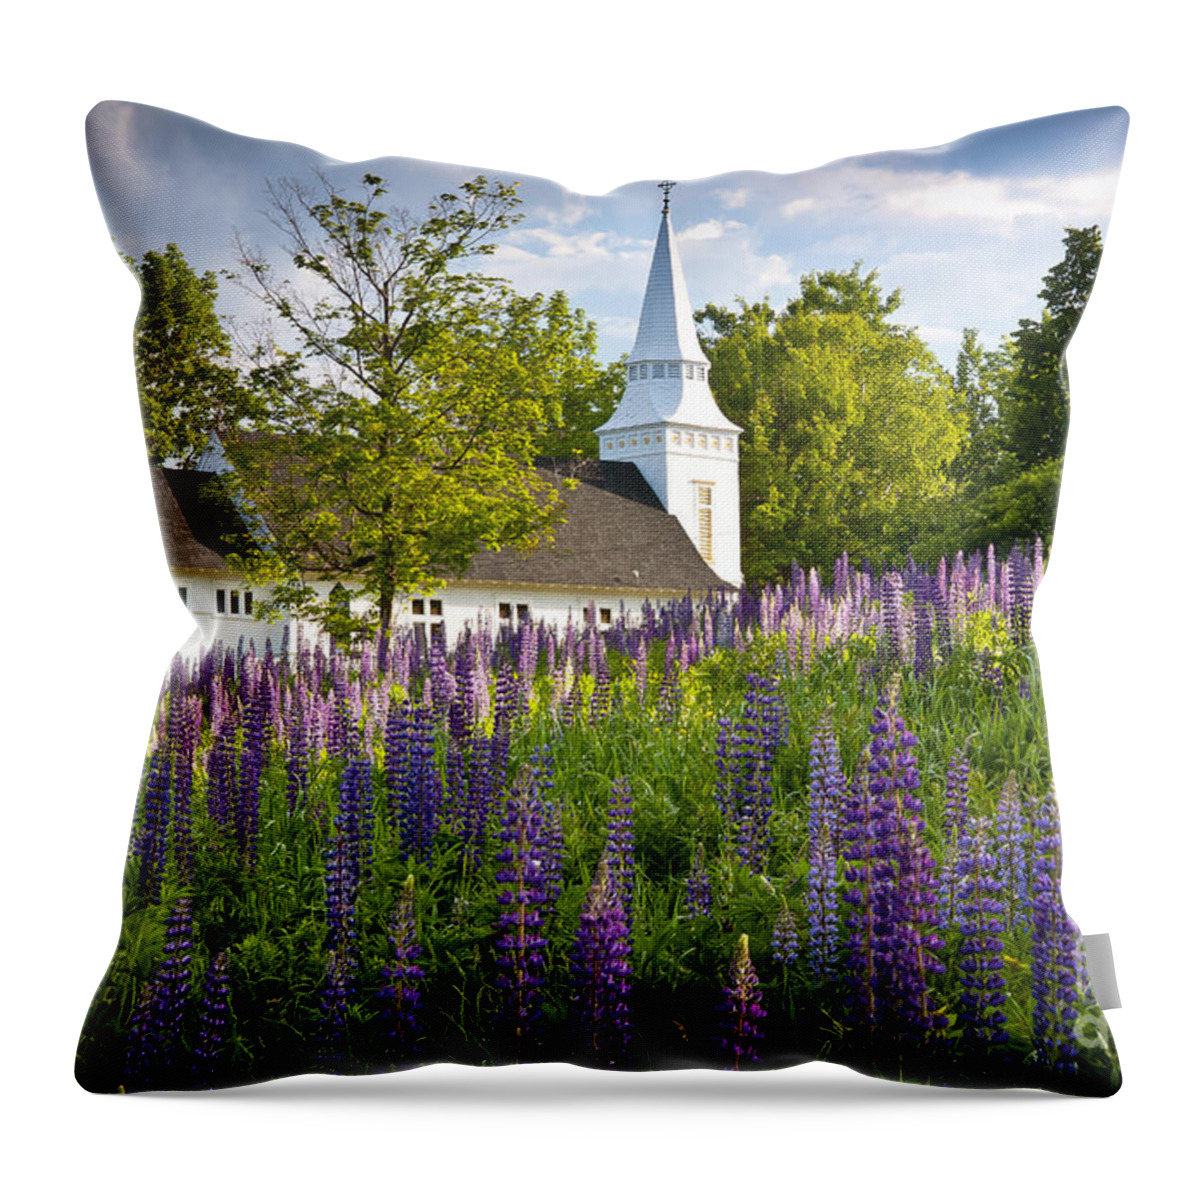 Antique Throw Pillow featuring the photograph Church on Sugar Hill by Susan Cole Kelly